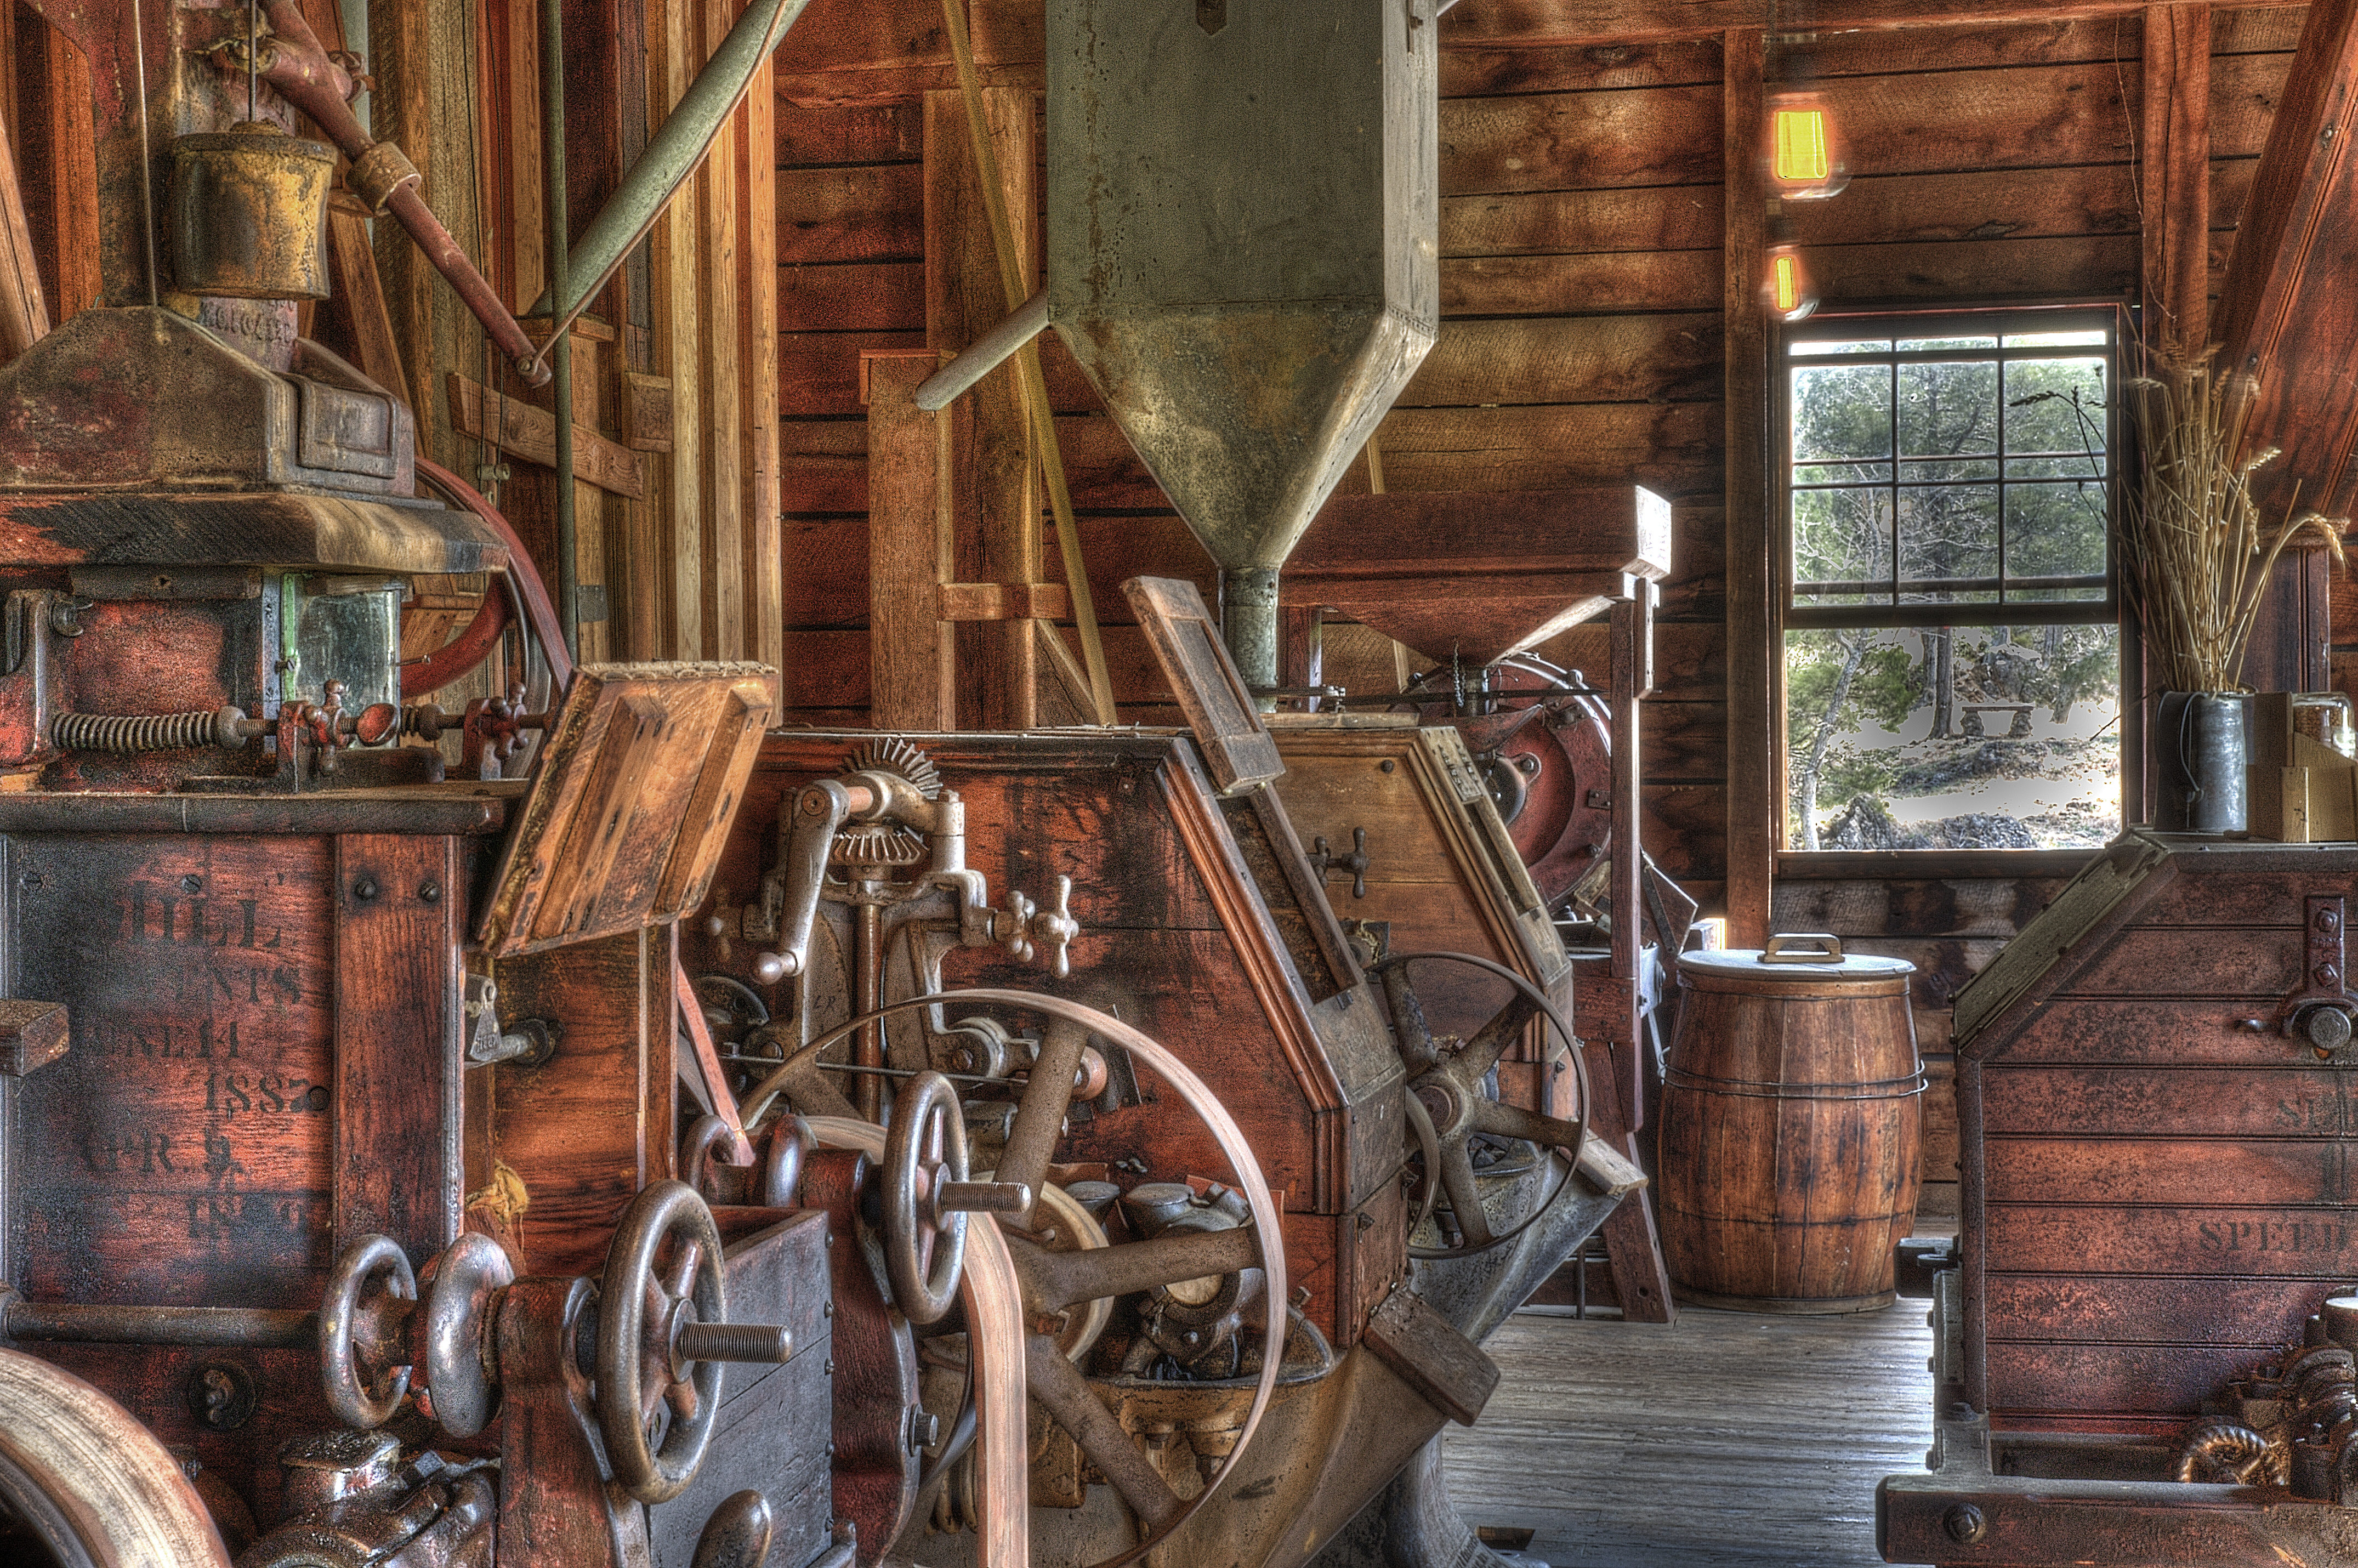 Inside an old Grist Mill | HDR creme